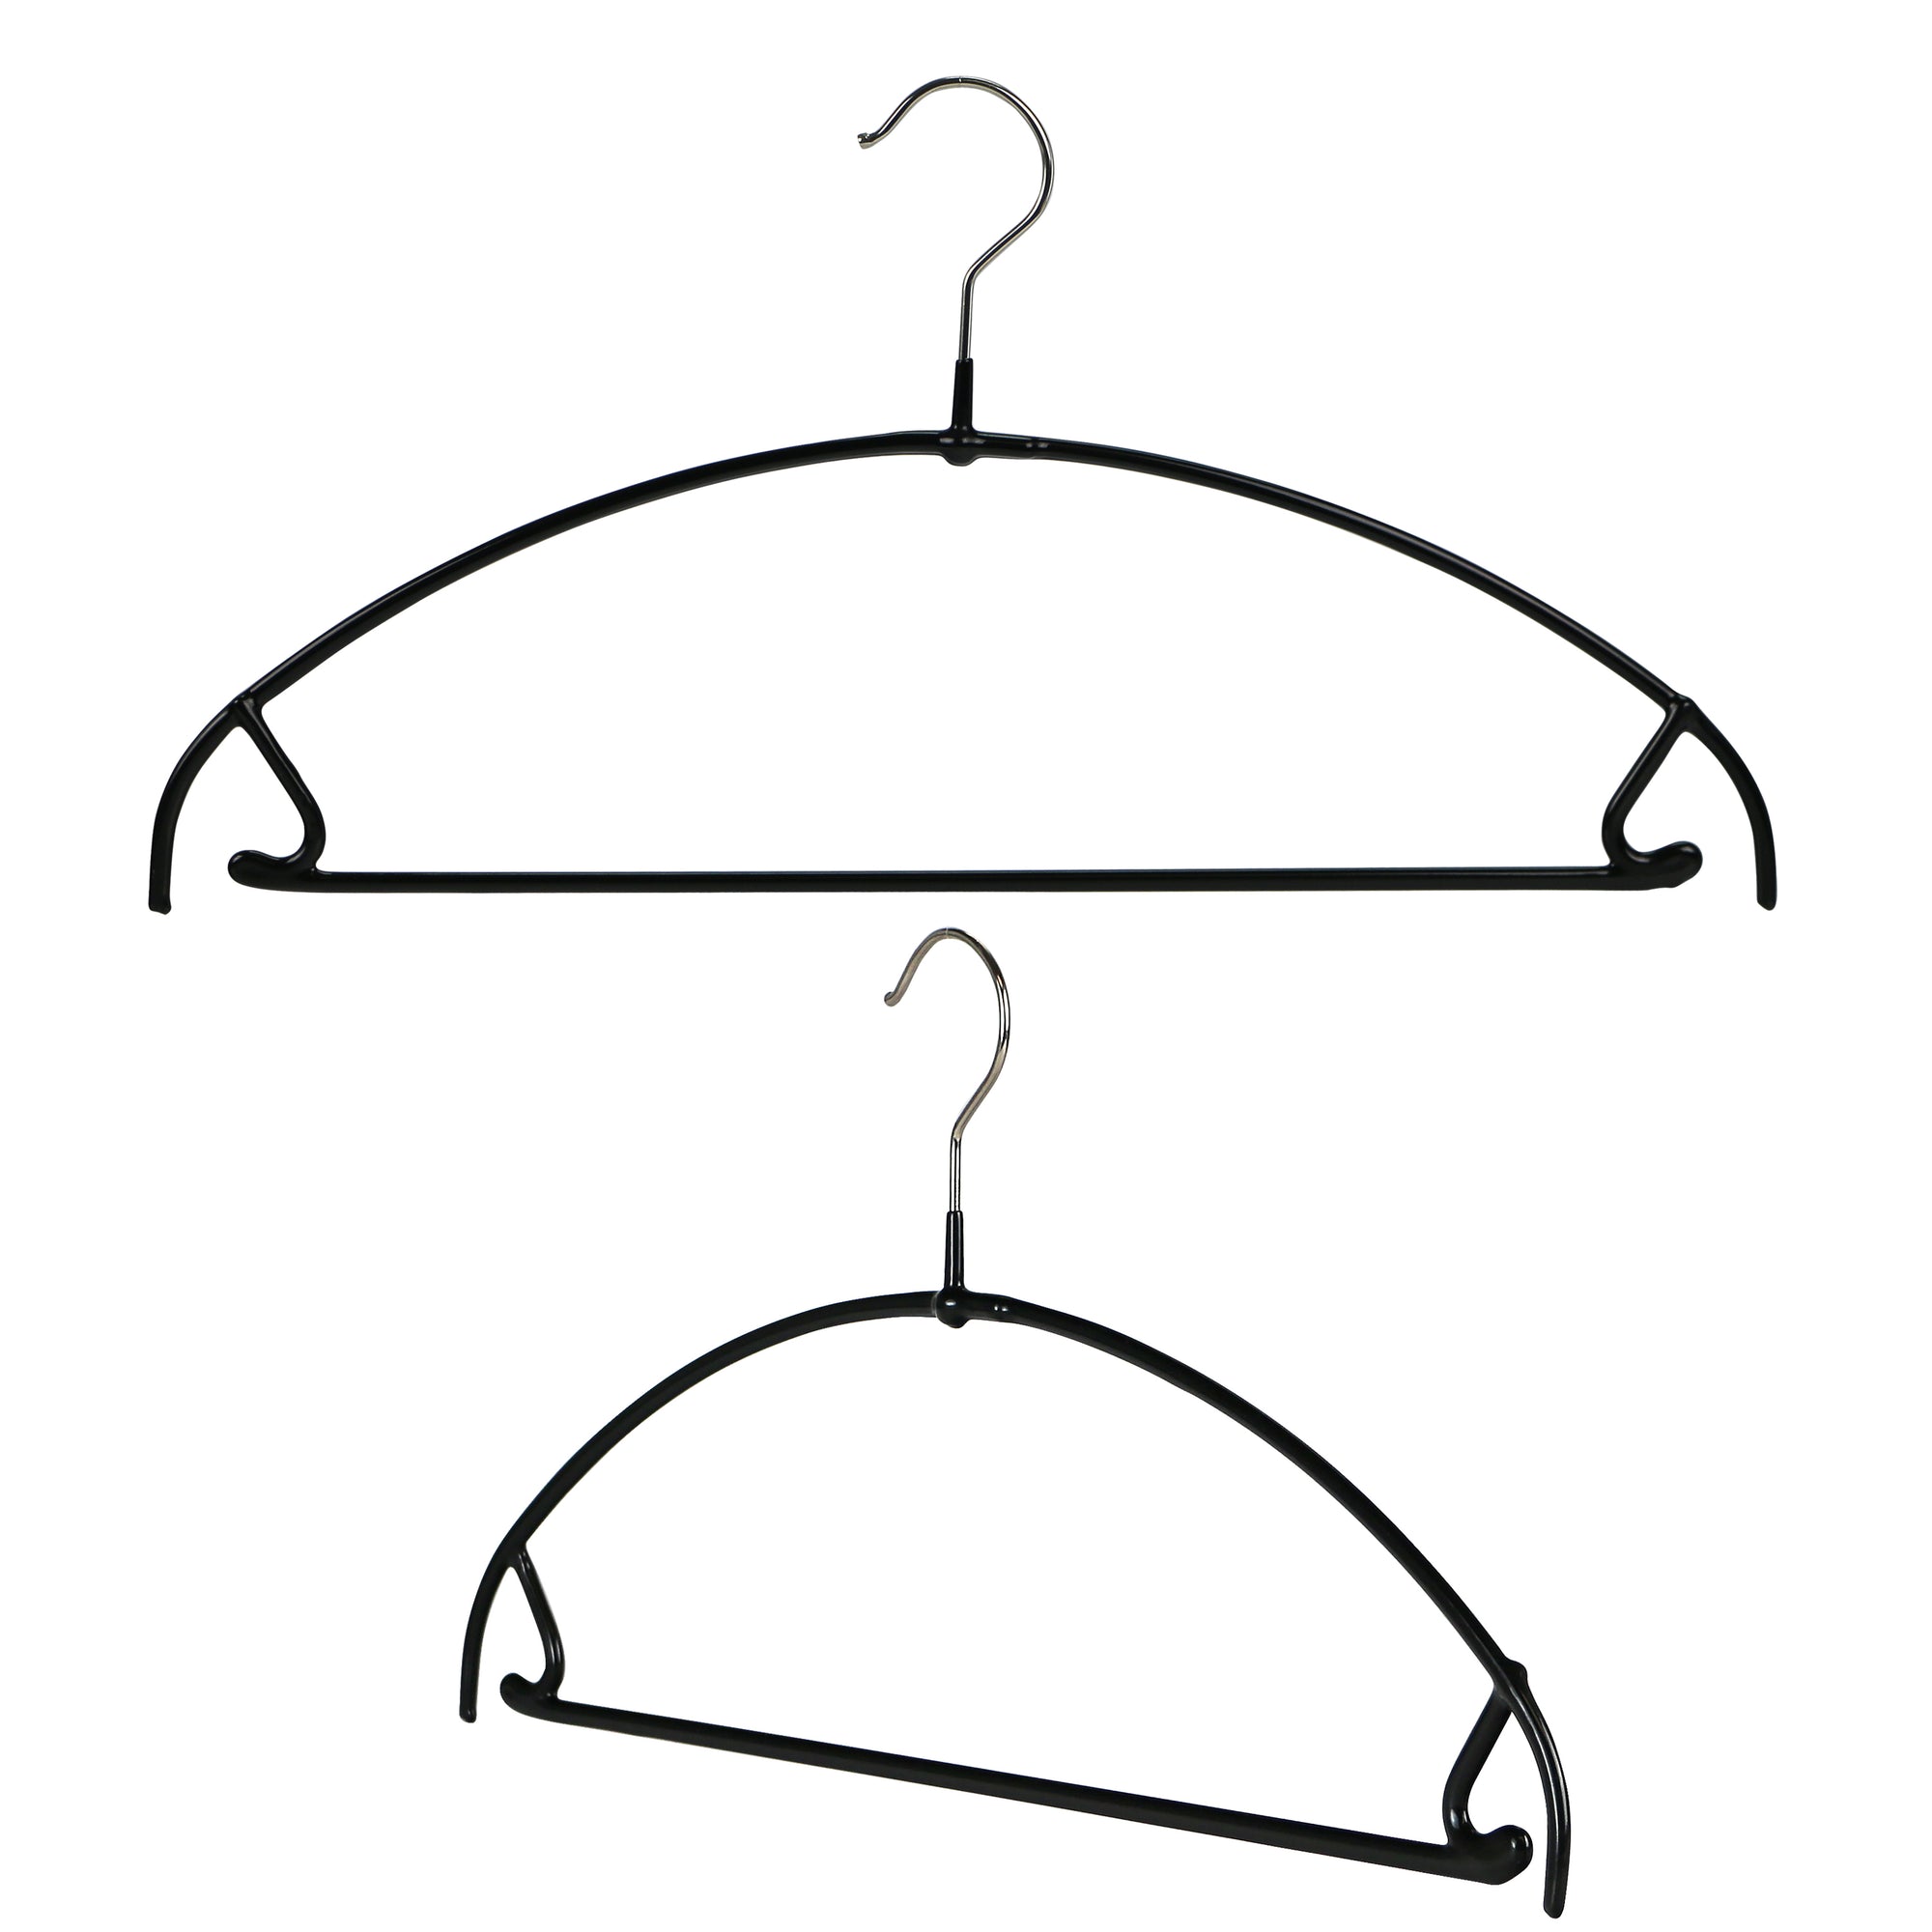 White Rubber Space-Saving Hangers